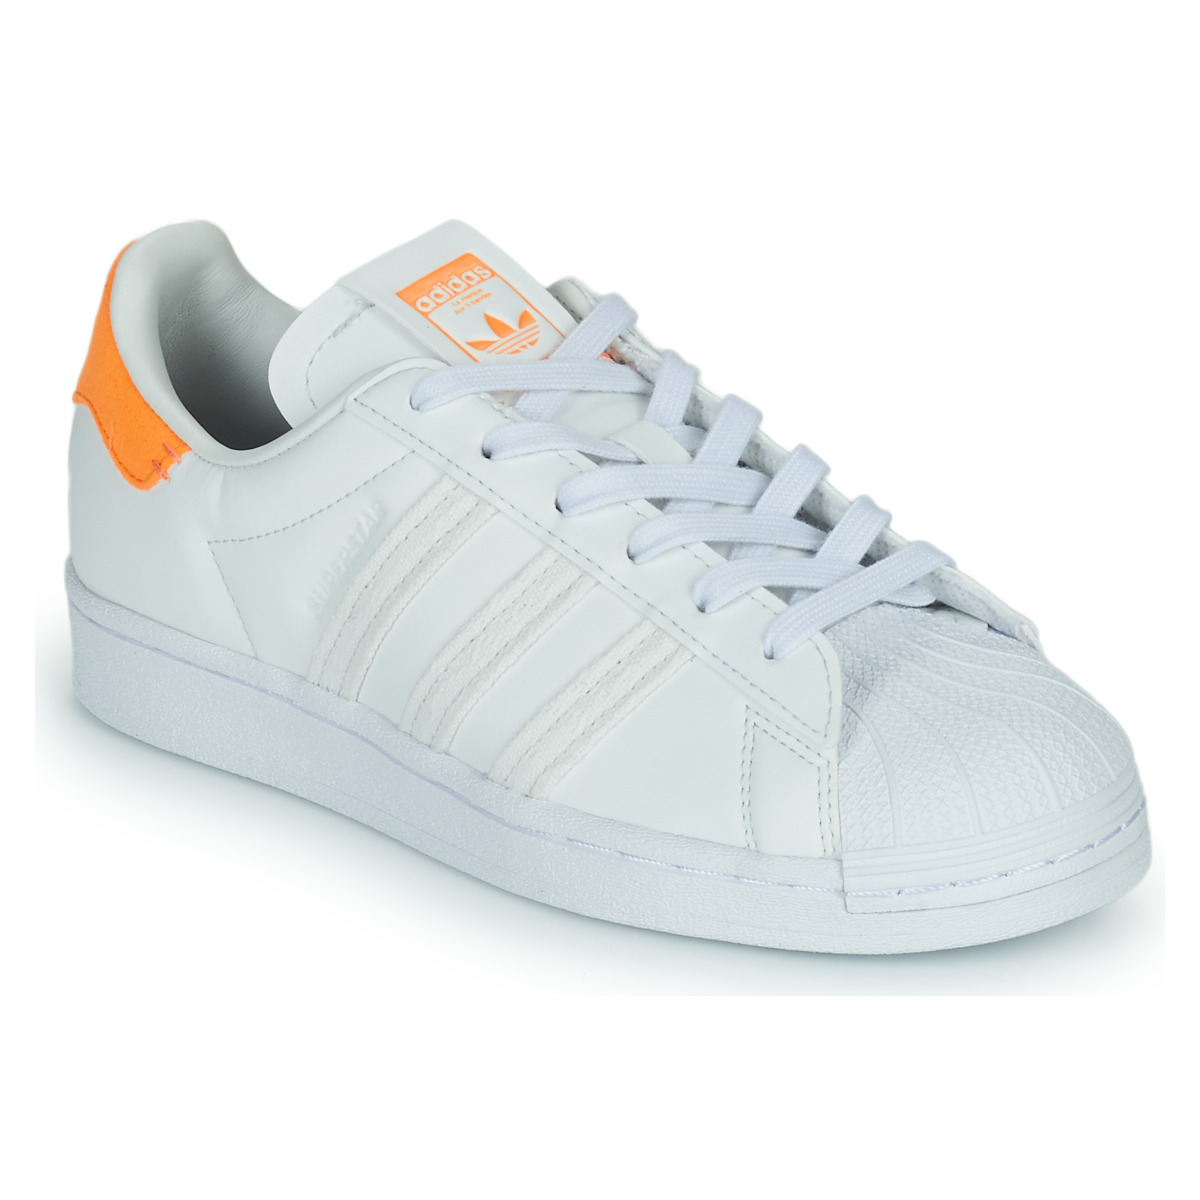 Low Free Spartoo - trainers Shoes / | W ! White Women SUPERSTAR delivery adidas Orange - top NET Originals